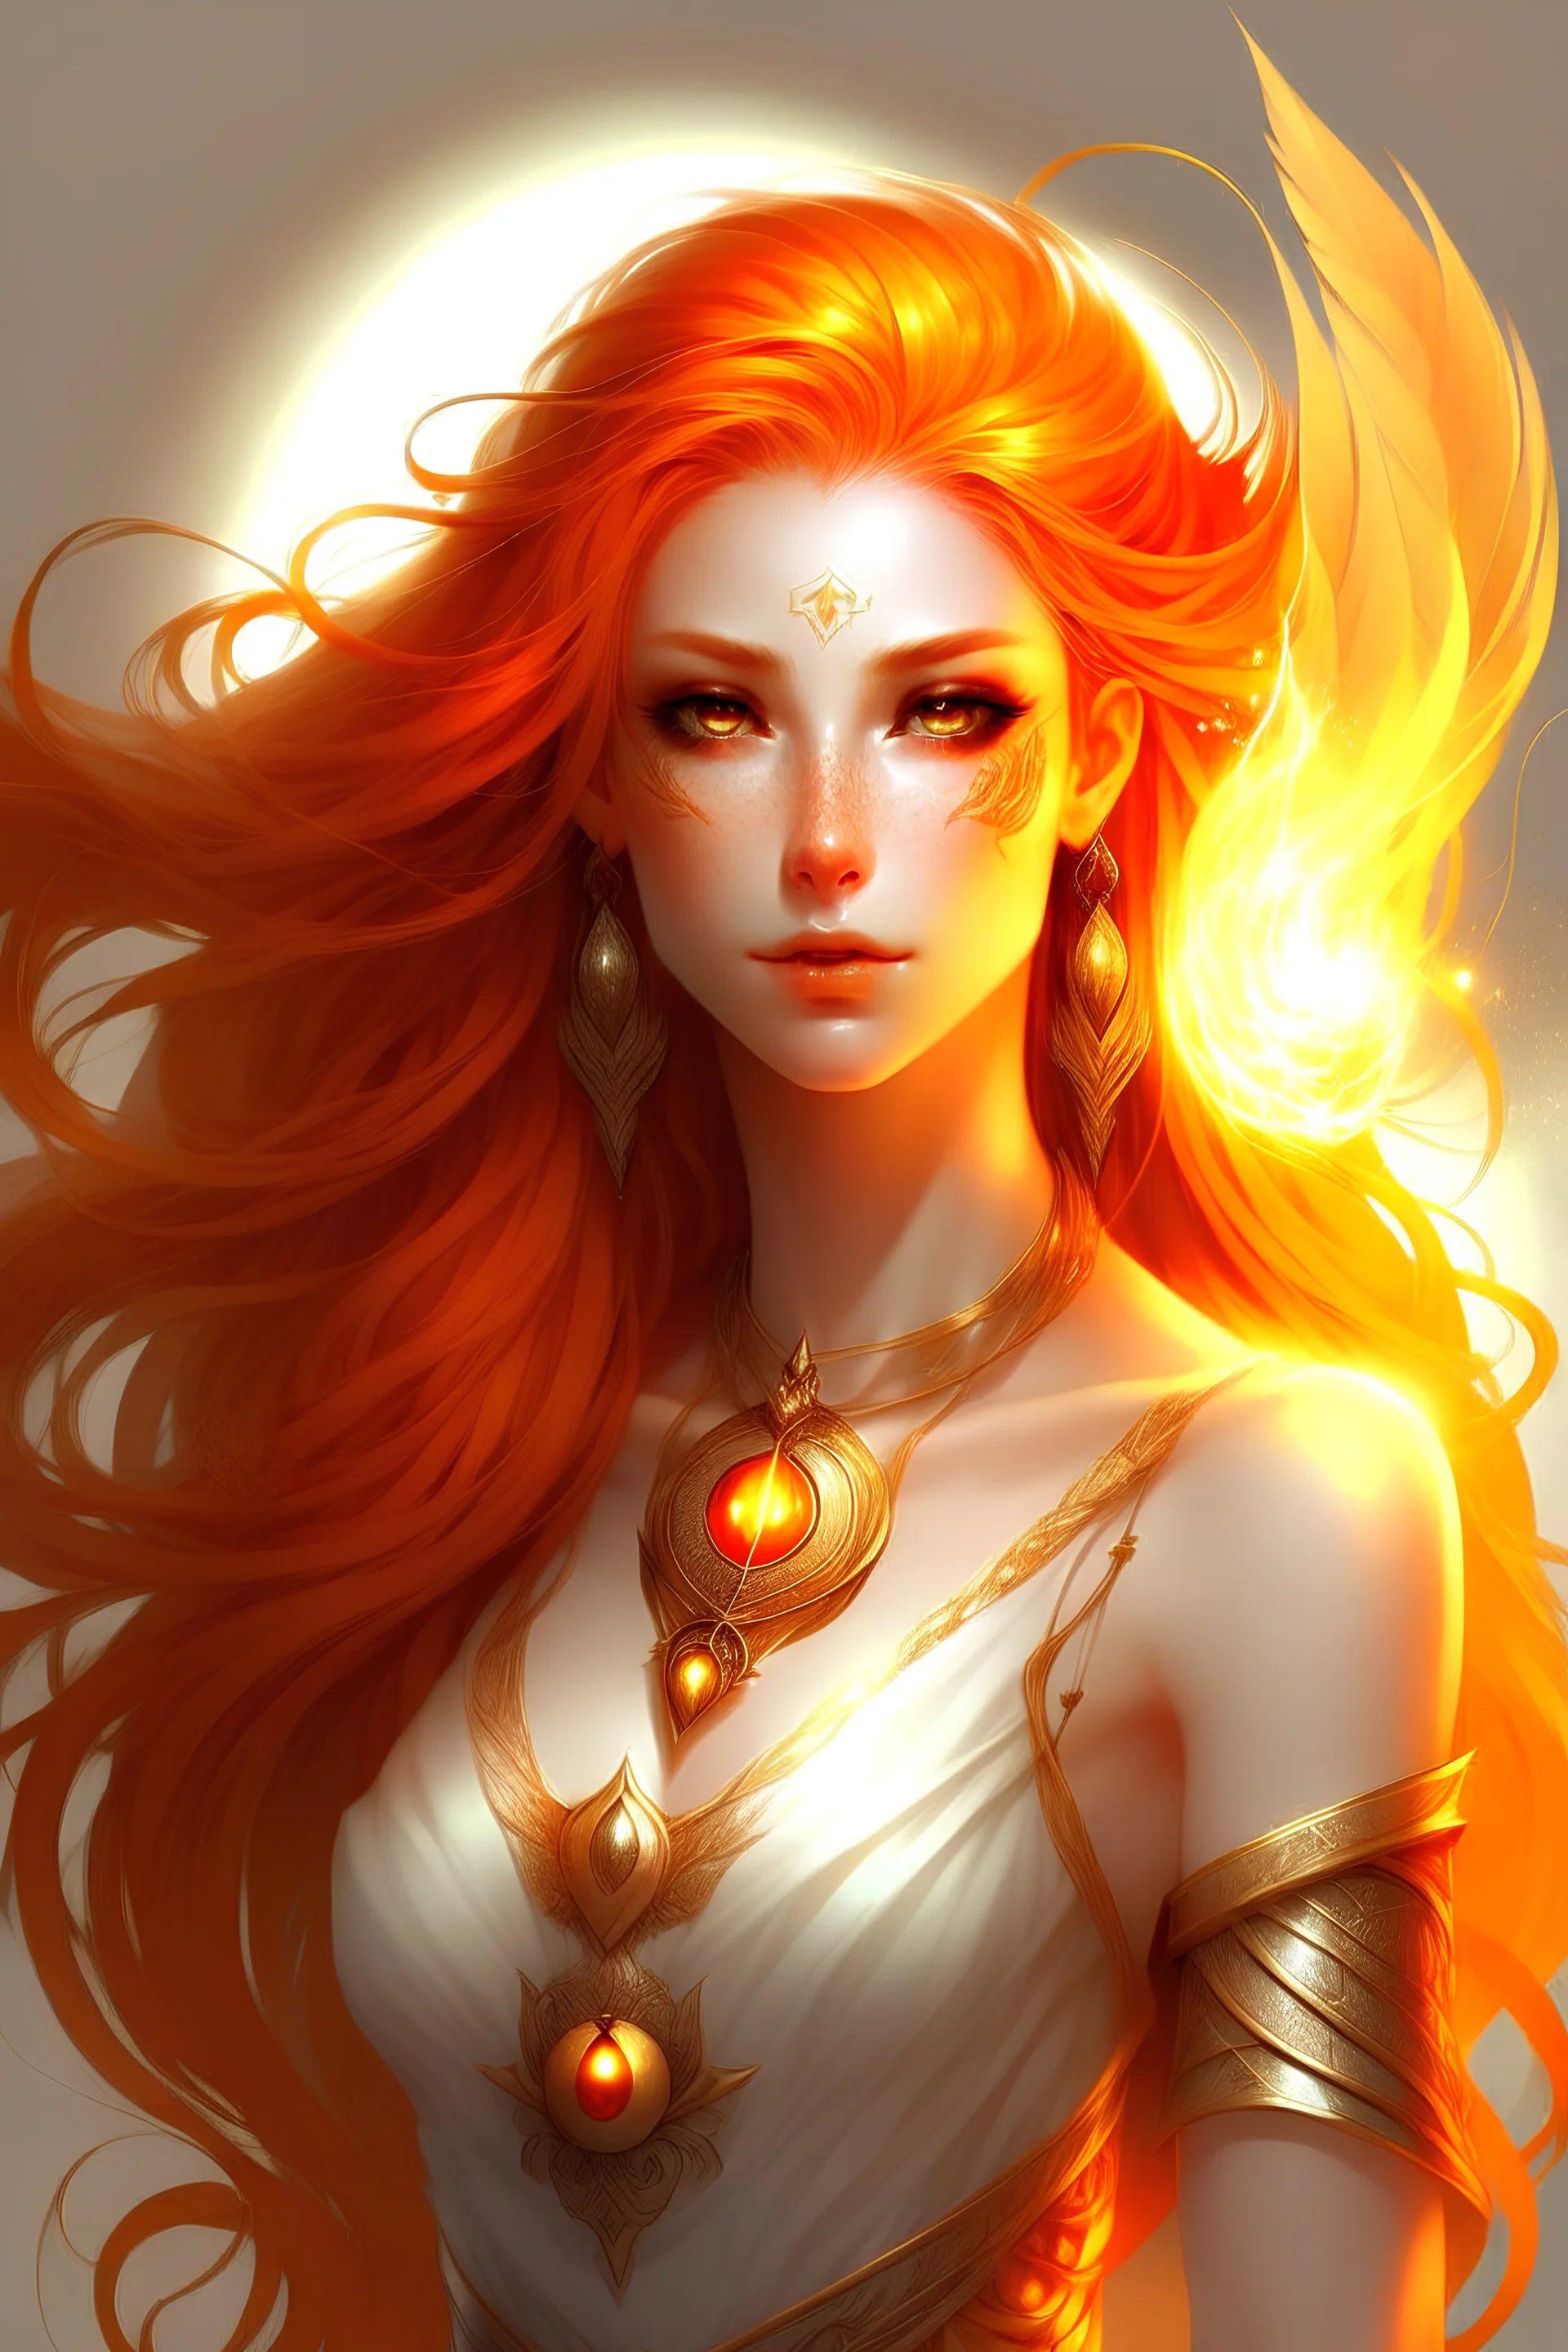 Create a dnd character. She's a summer eladrin with delicate features and innocent stunning beauty. She's a circle of the wildfire with flames surrounding her. Her red wild haired is made of flames while her golden eyes are liquid fire. She has sun-kissed skin. Her clothing style gives the feeling of a phoenix